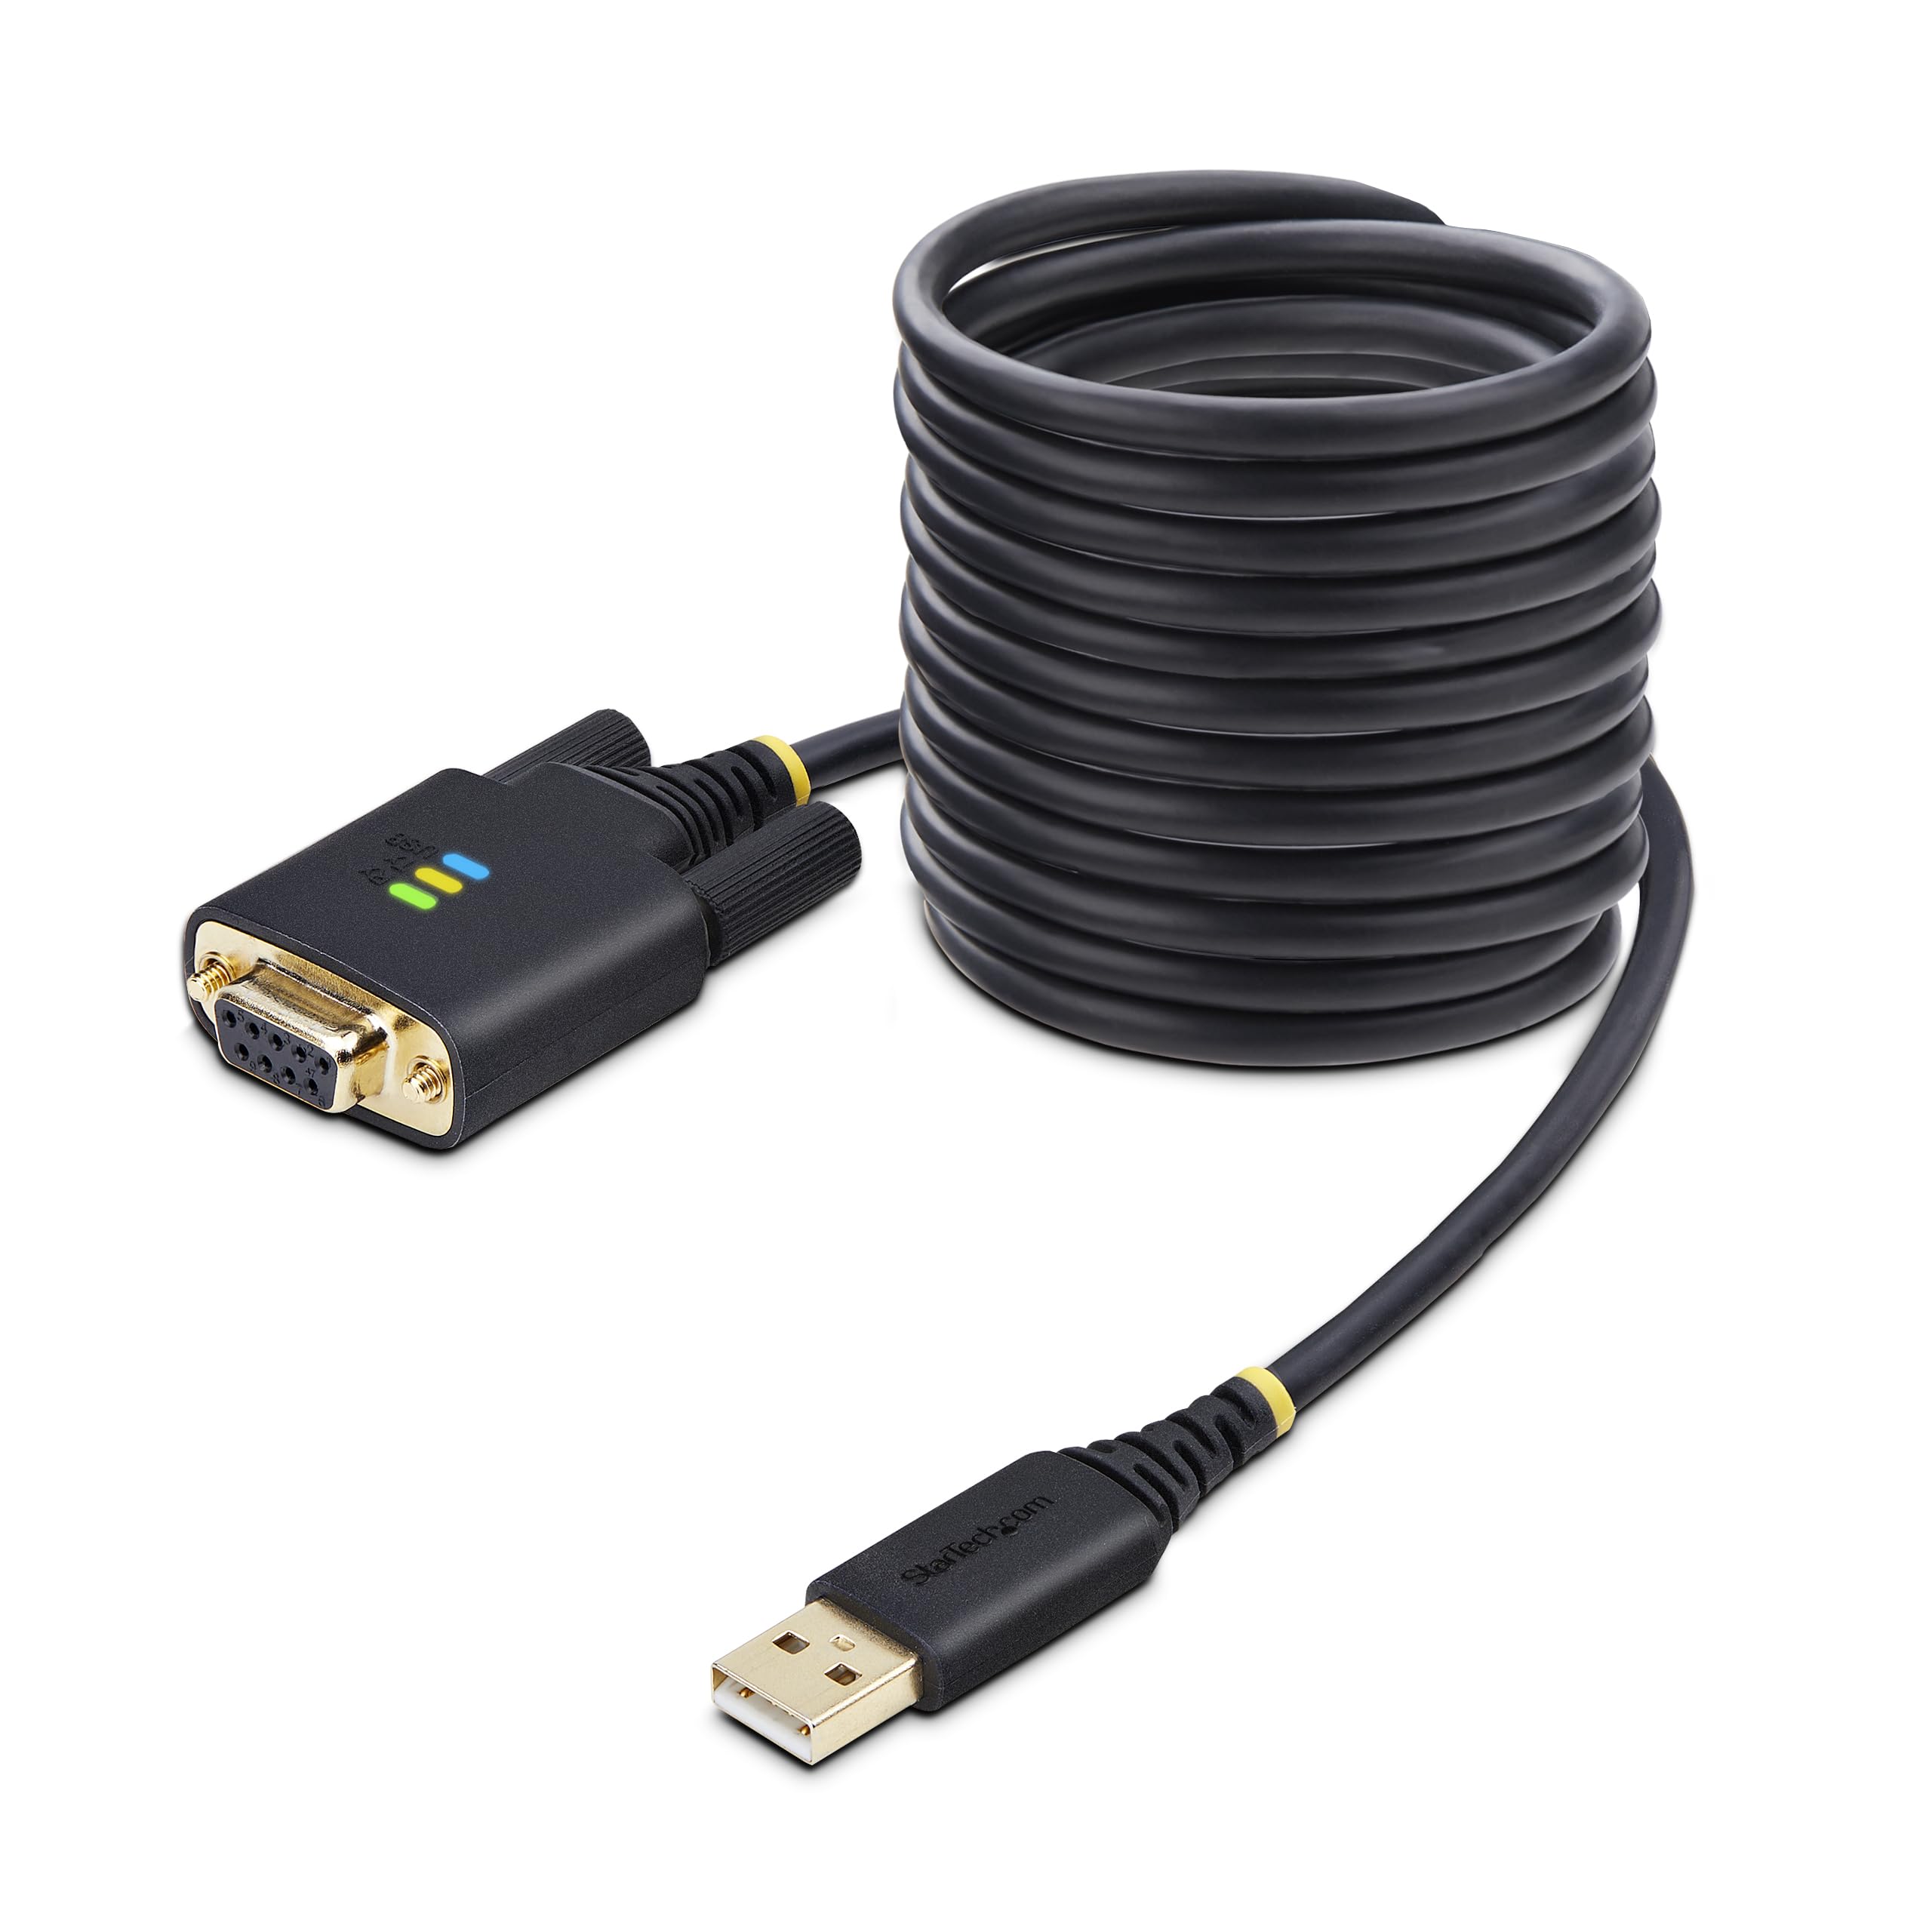 CAVO USB A SERIALE NULL MODEM